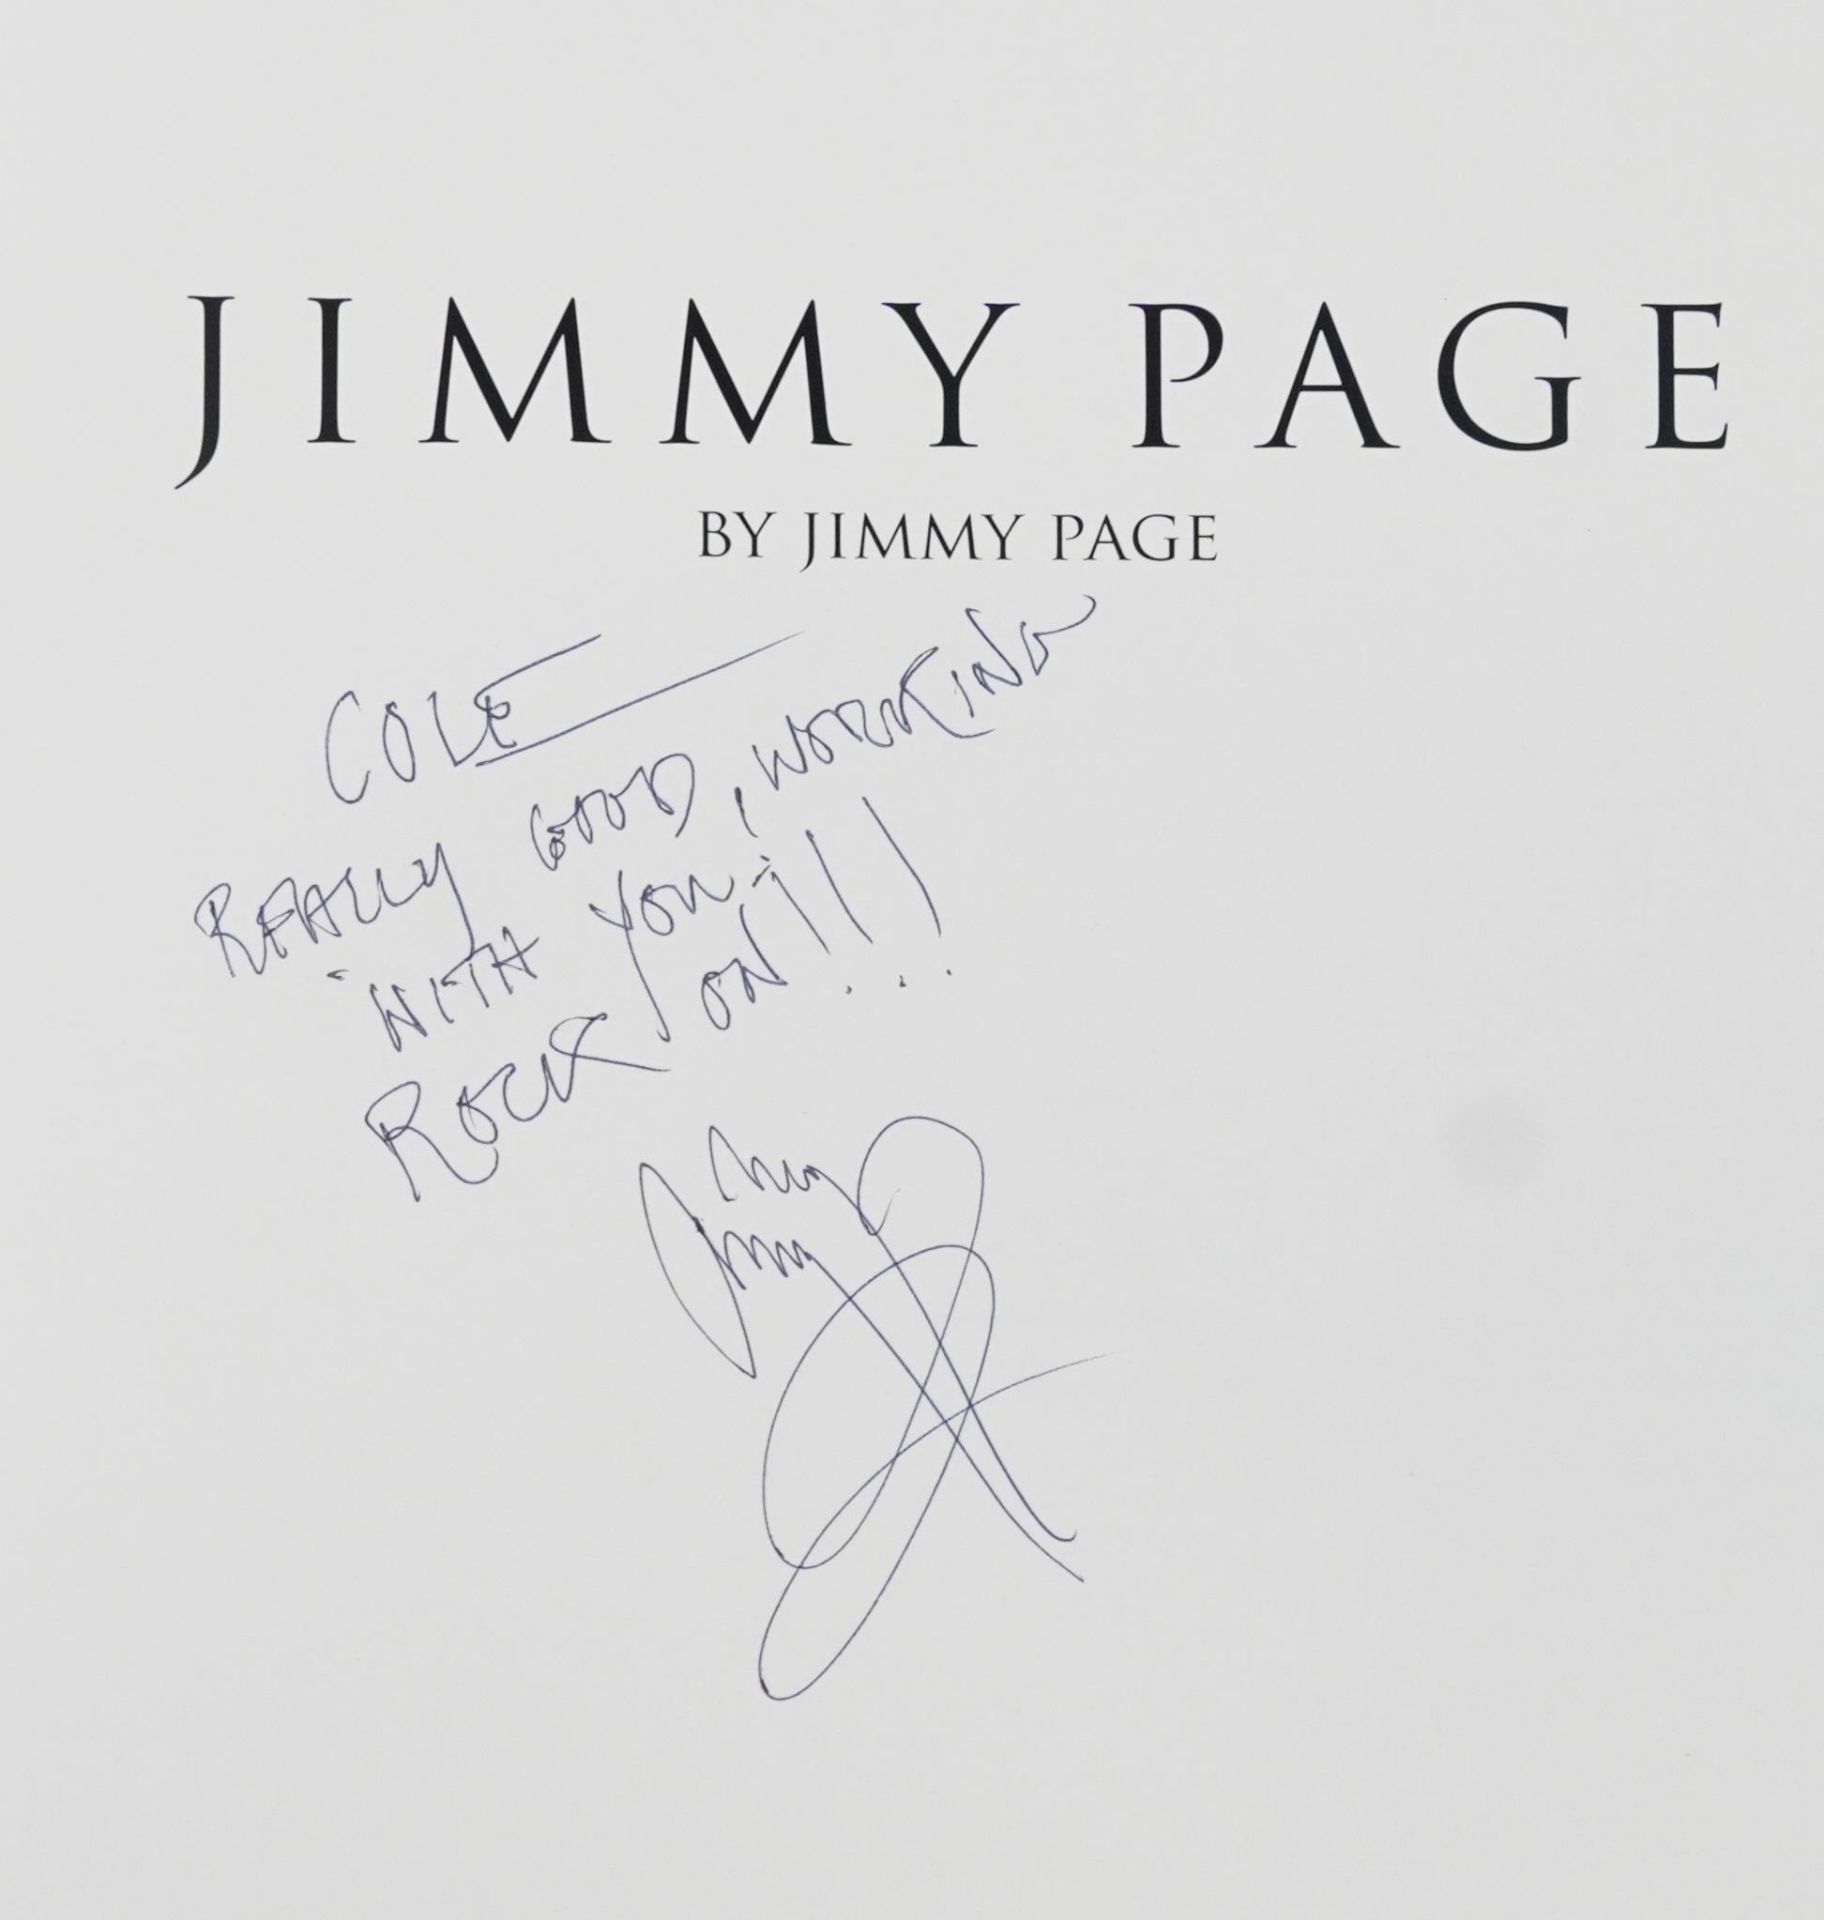 Jimmy Page by Jimmy Page, hardback book signed by Jimmy Page and inscribed Cole really good - Image 3 of 4